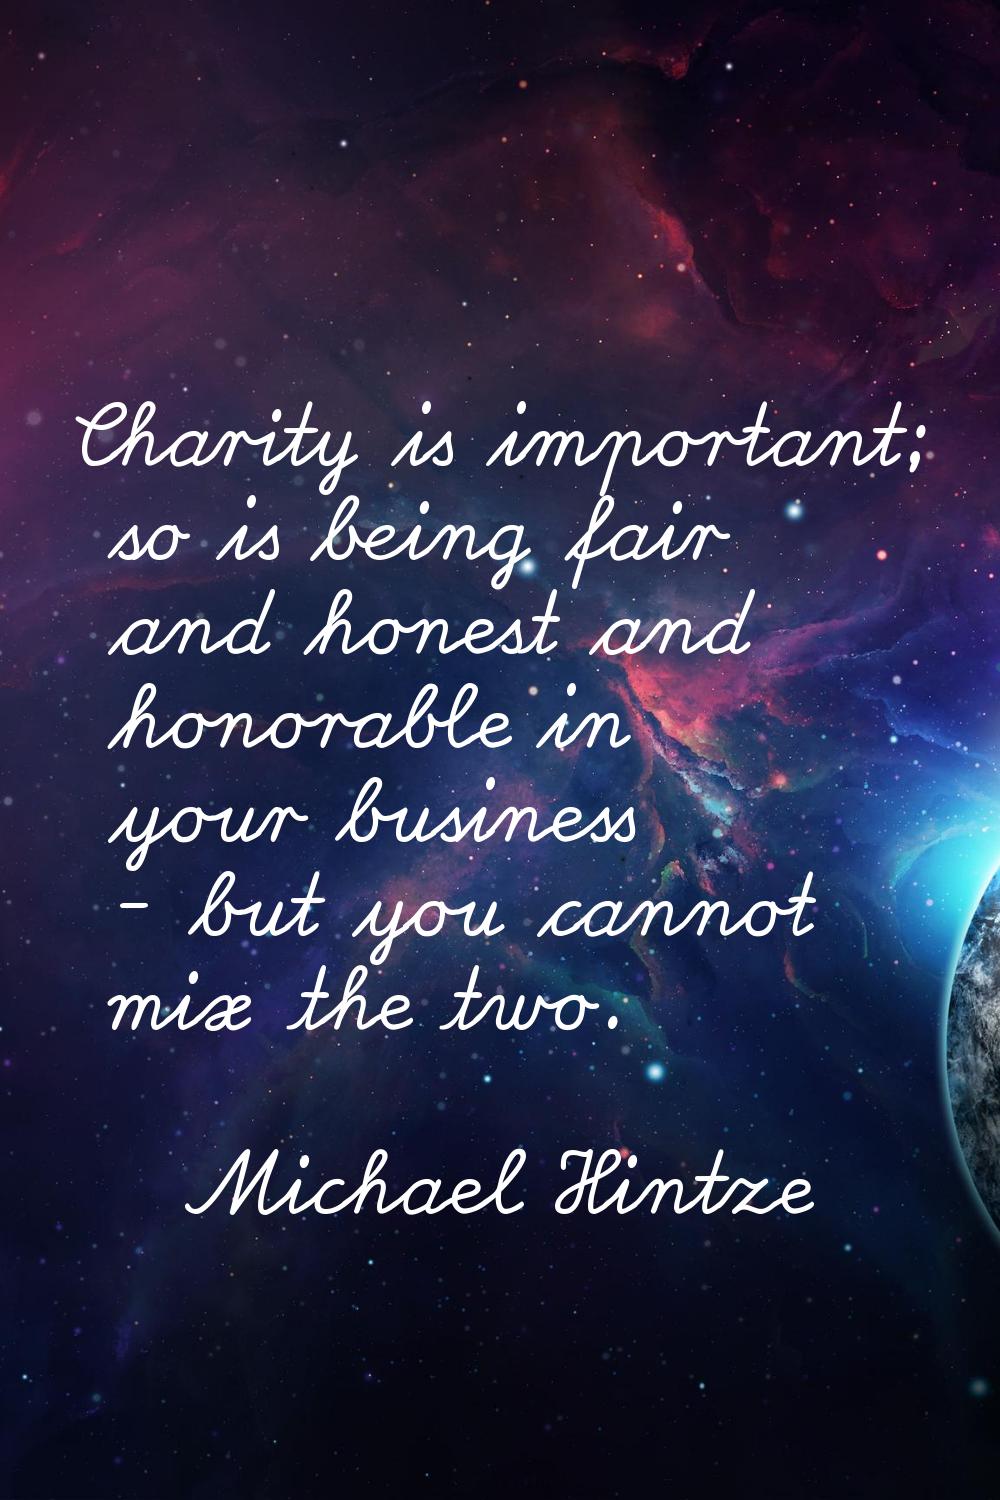 Charity is important; so is being fair and honest and honorable in your business - but you cannot m